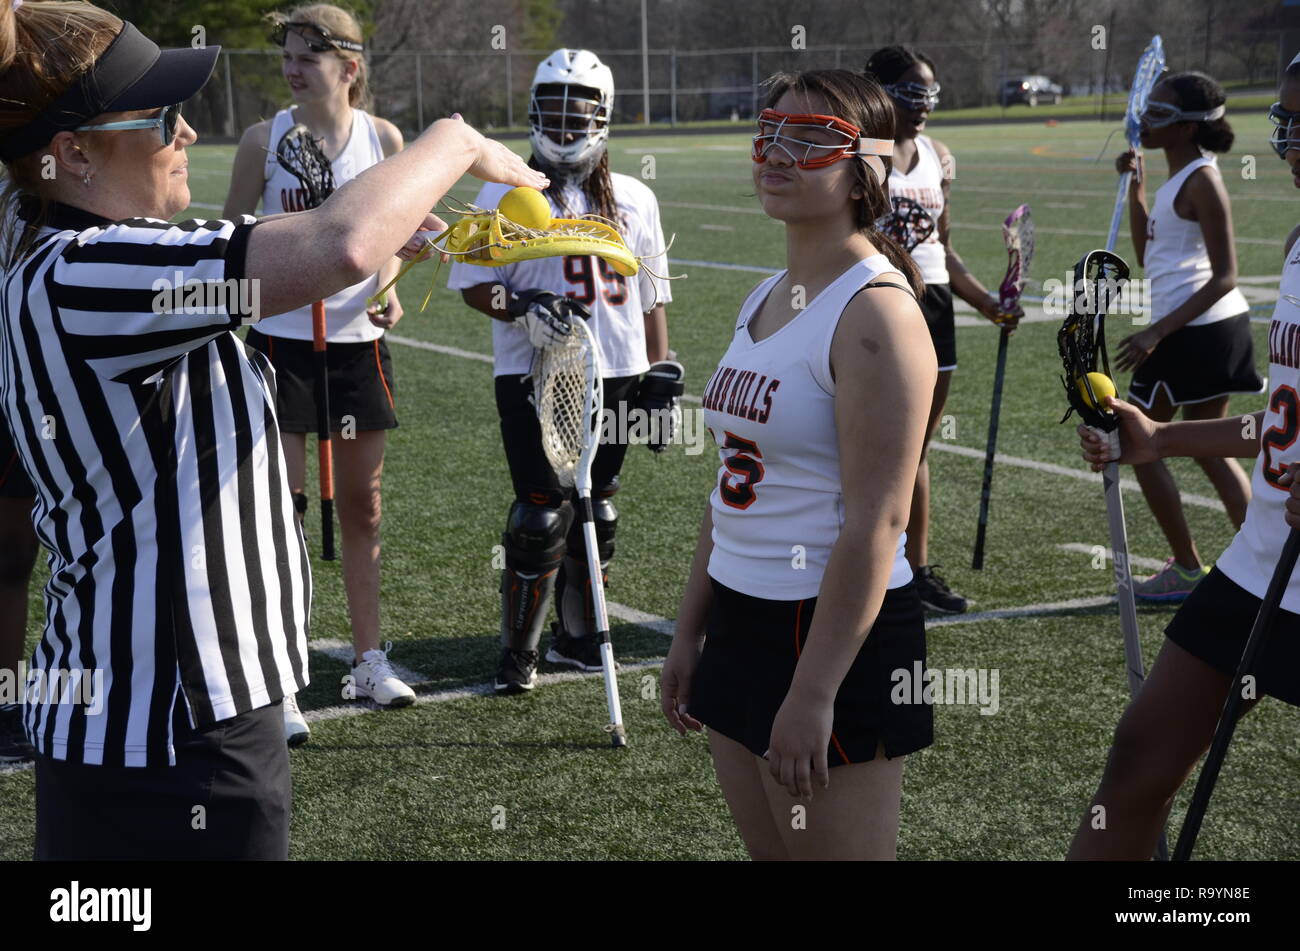 referee examines  a player's lacrosse stick in a high school lacrosse game Stock Photo